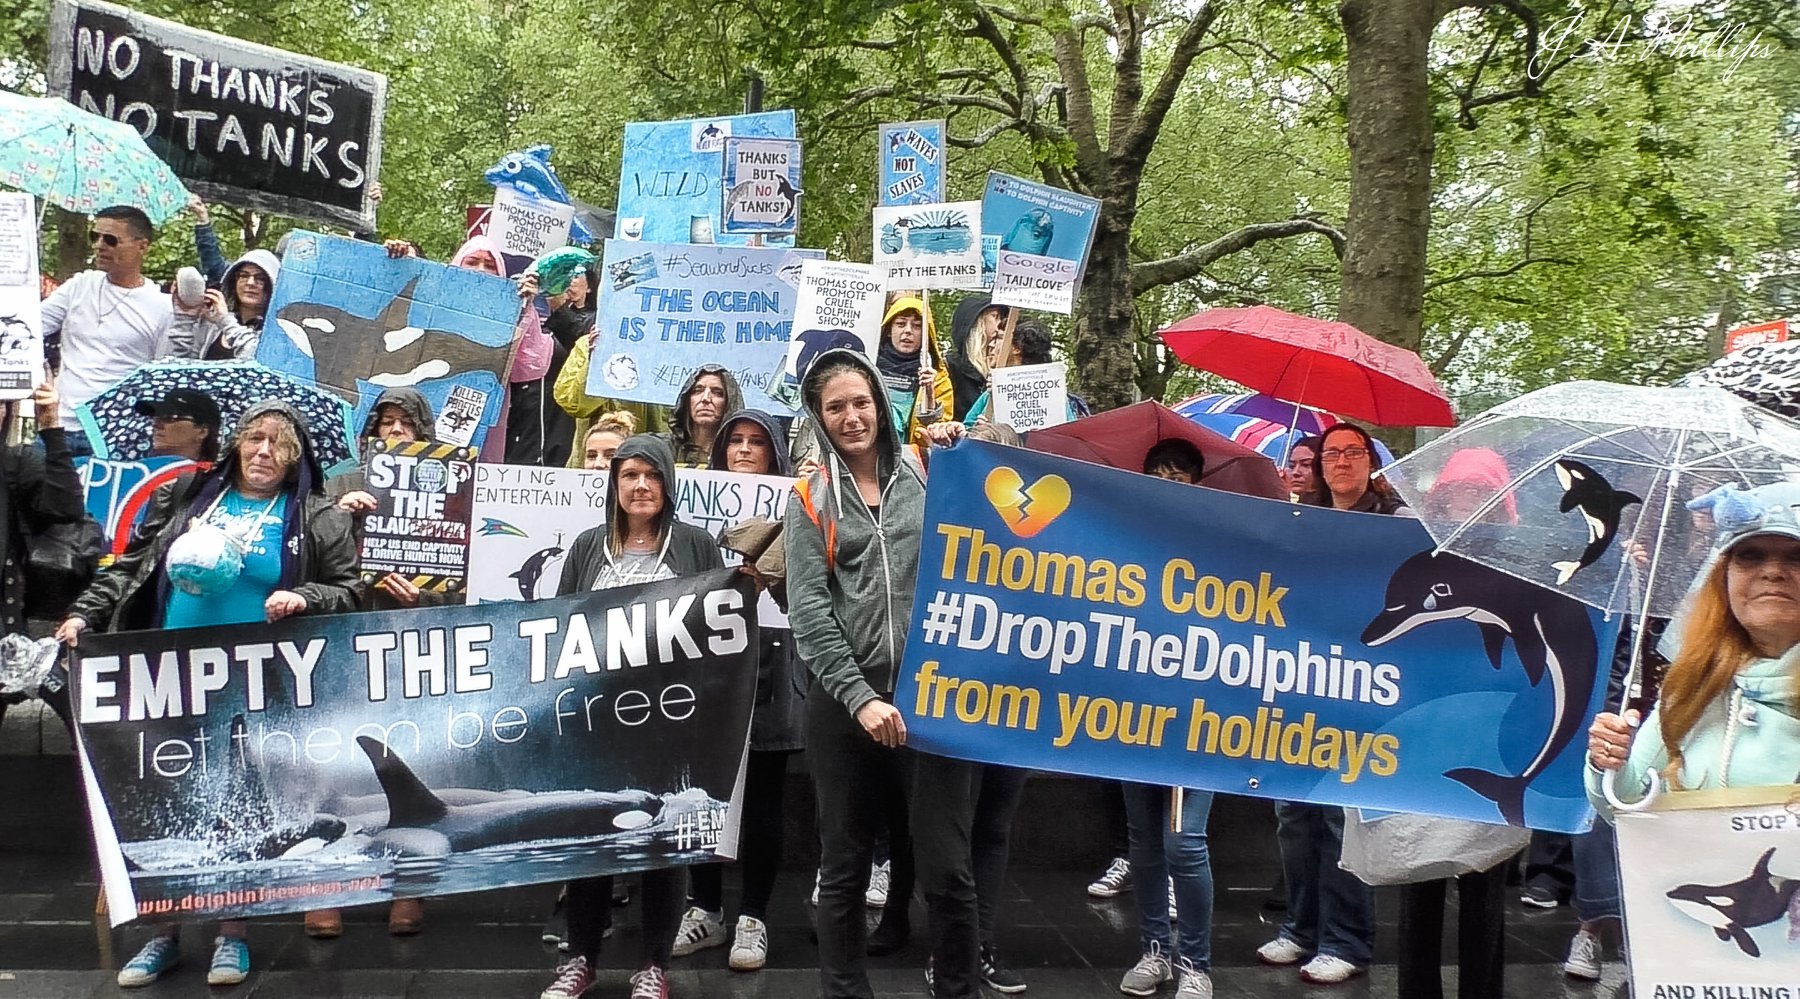 Thomas Cook ends ticket sales to attractions with captive dolphins